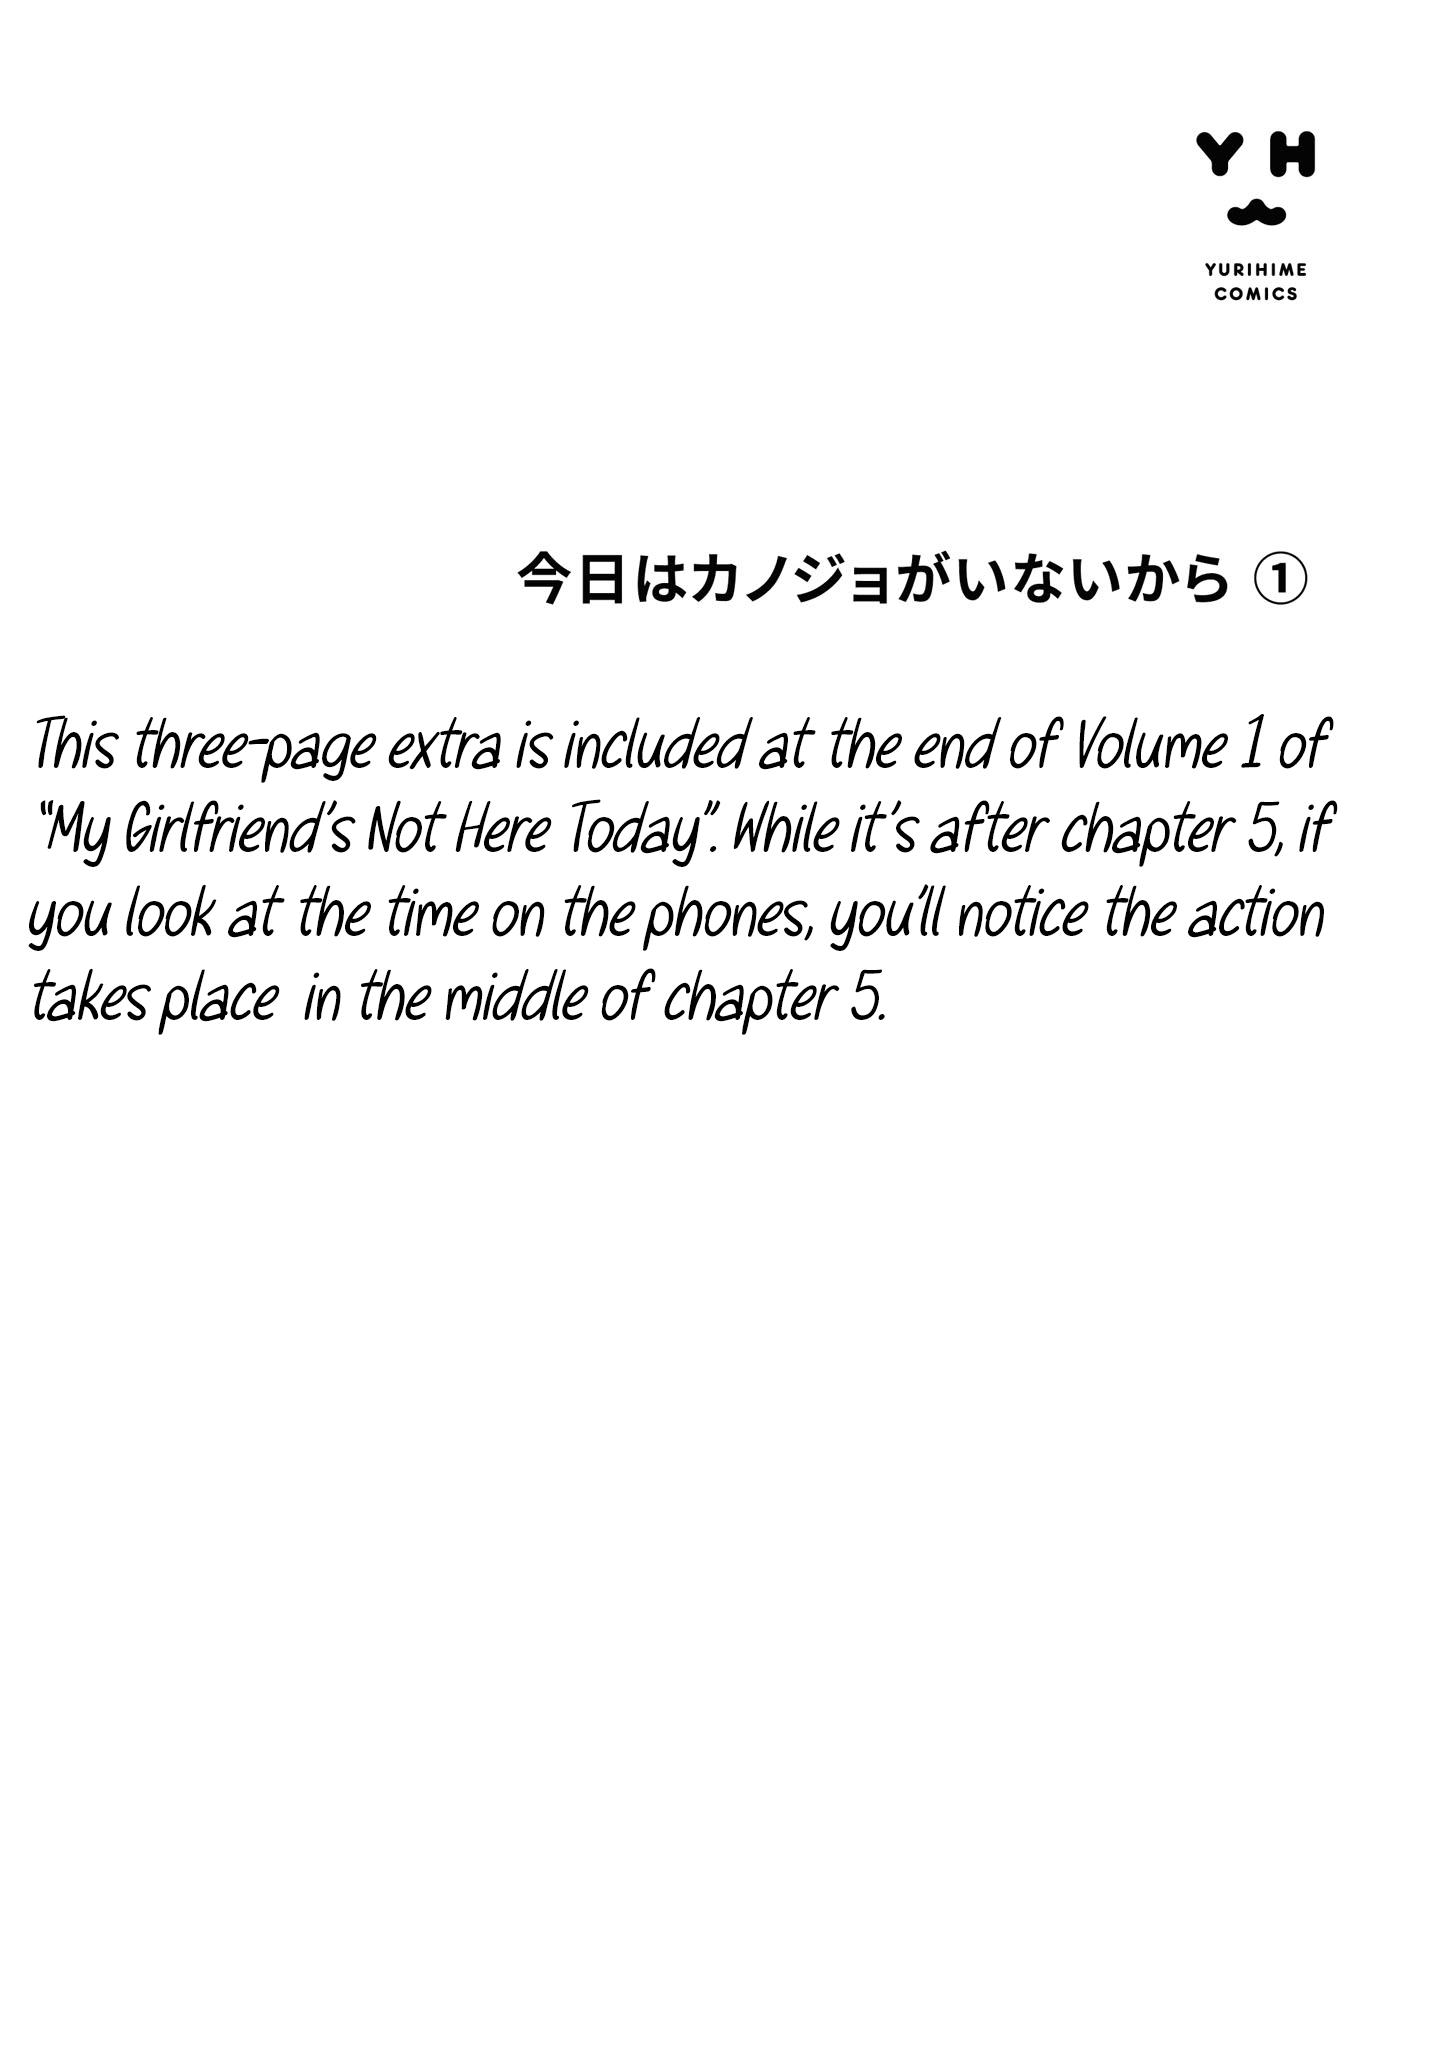 My Girlfriend’S Not Here Today Vol.1 Chapter 5.5: Afterword And Extra Pages Volume 1 - Picture 1